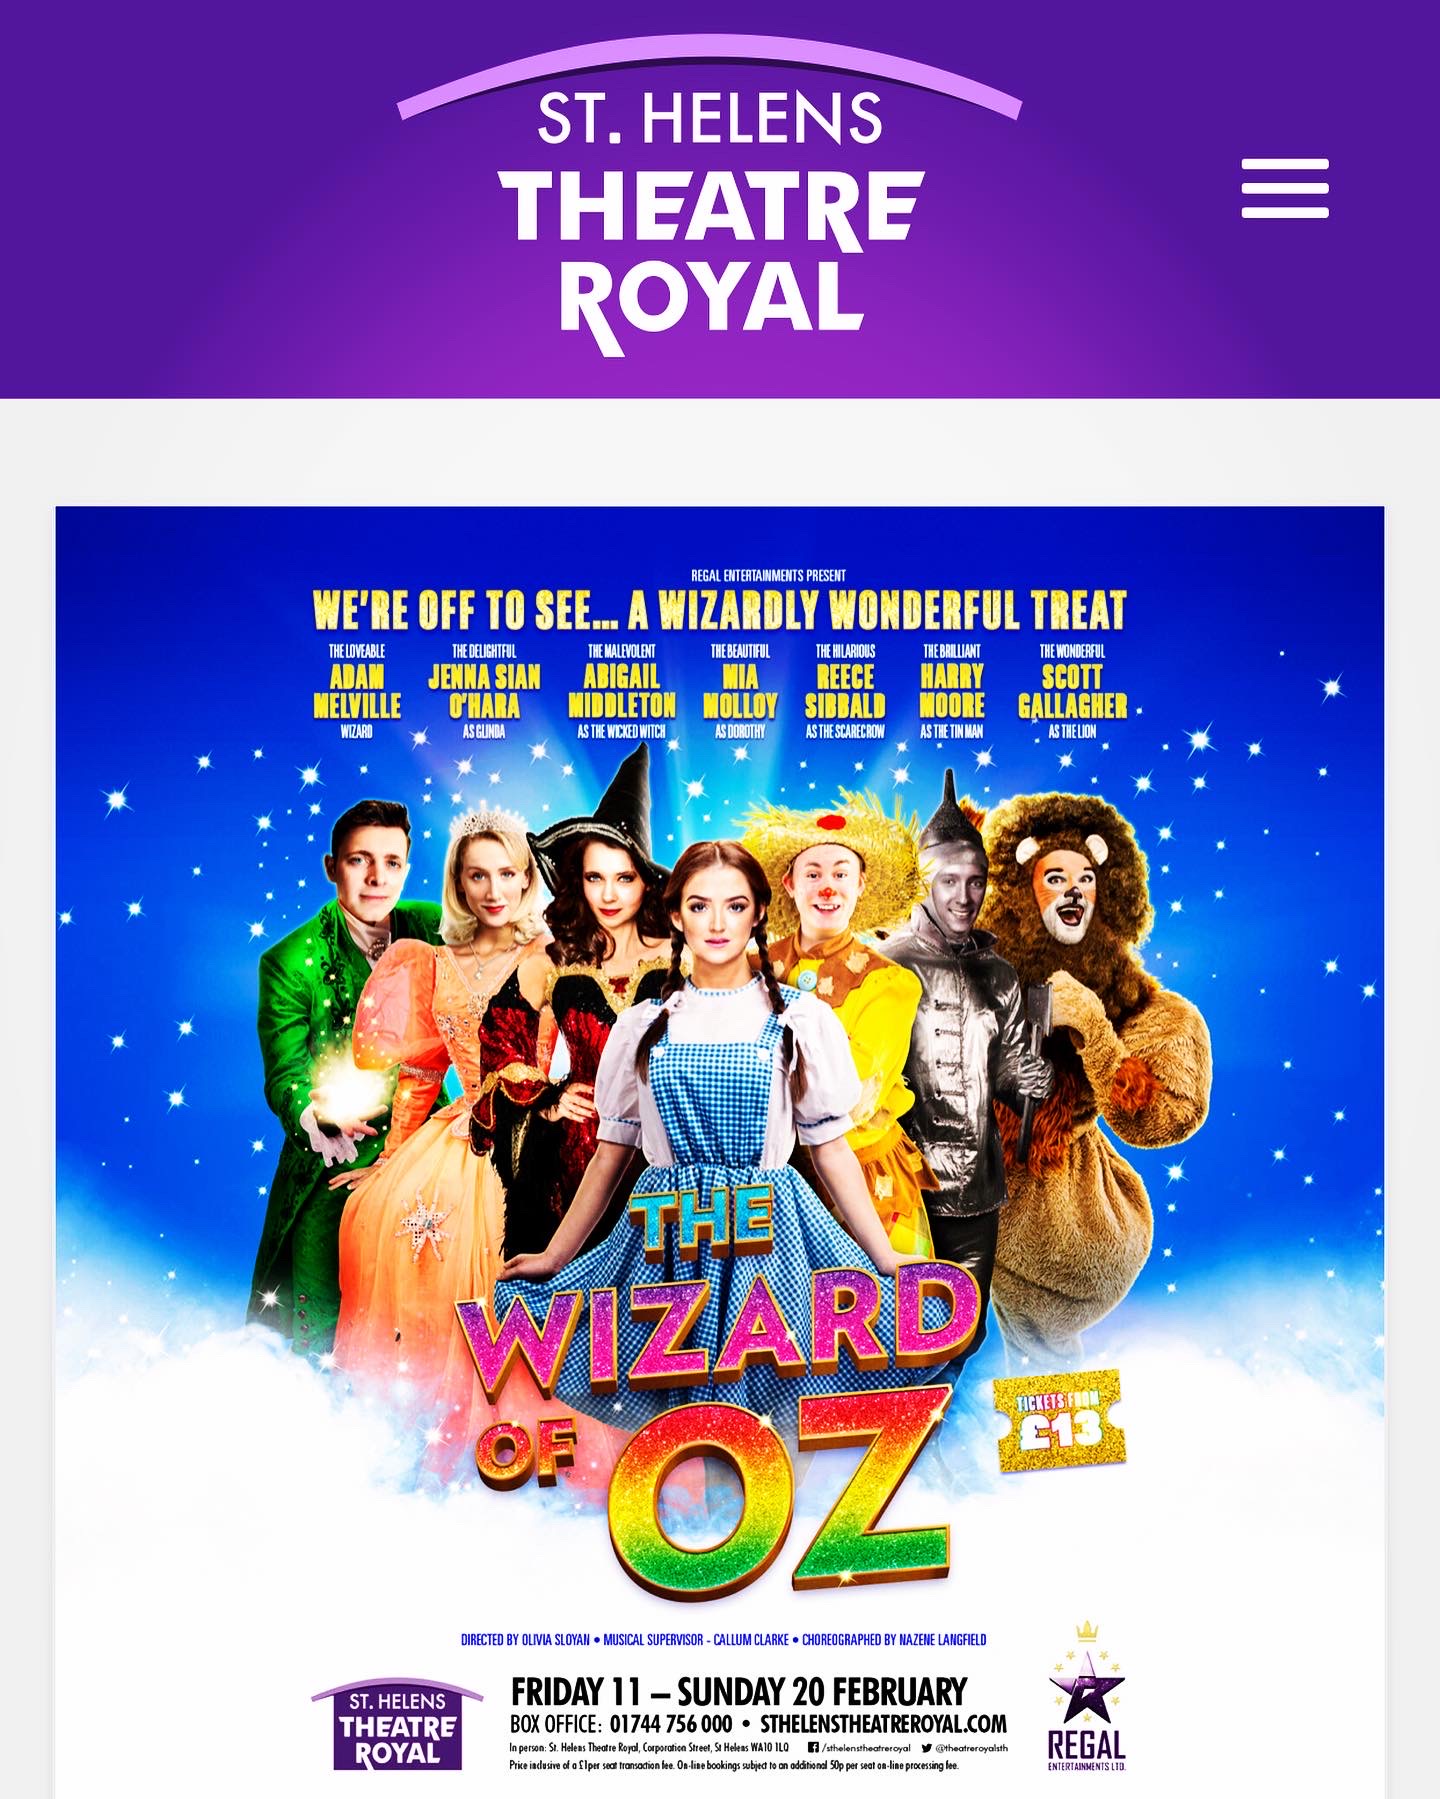 Be Wowed By The Wizard Of Oz At St Helen’s Theatre This Half Term! 